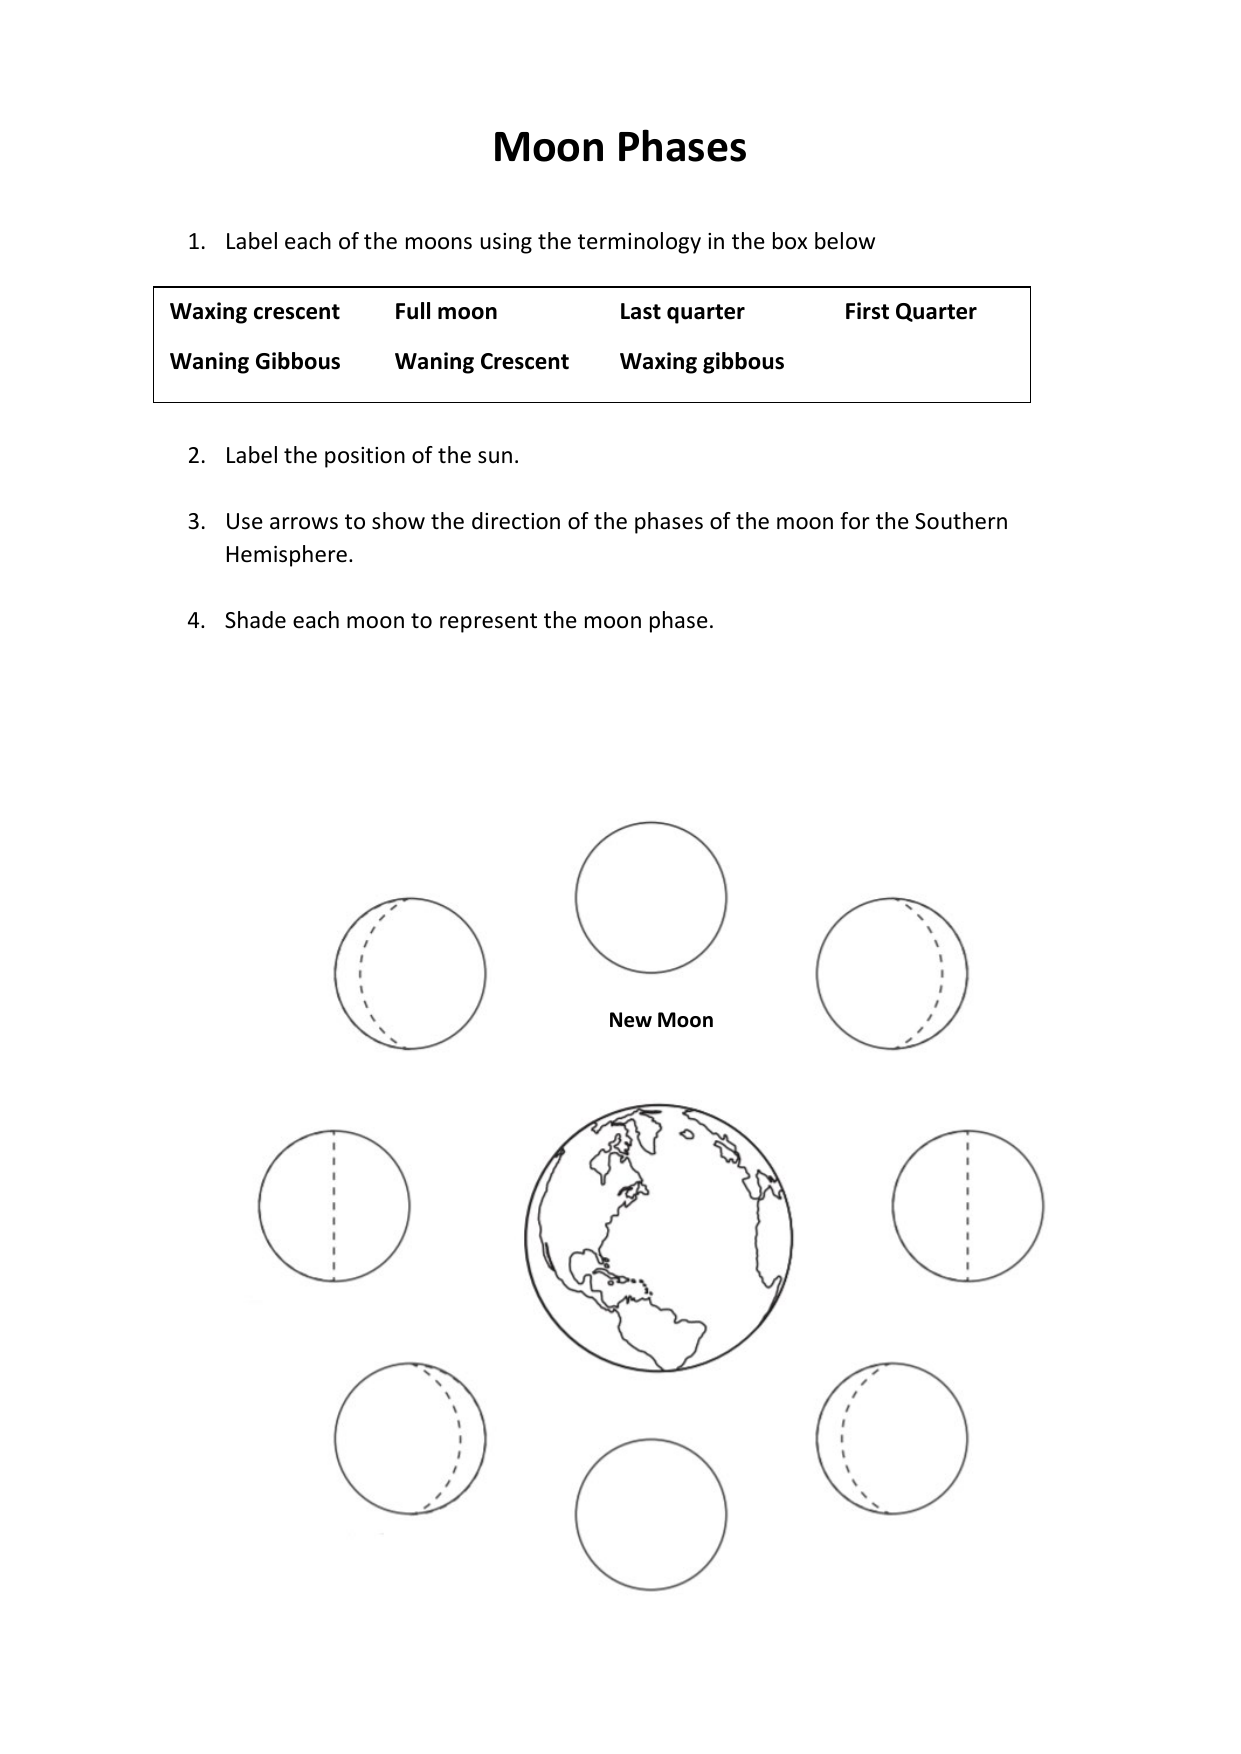 Moon Phases labelling Intended For Moon Phases Worksheet Answers